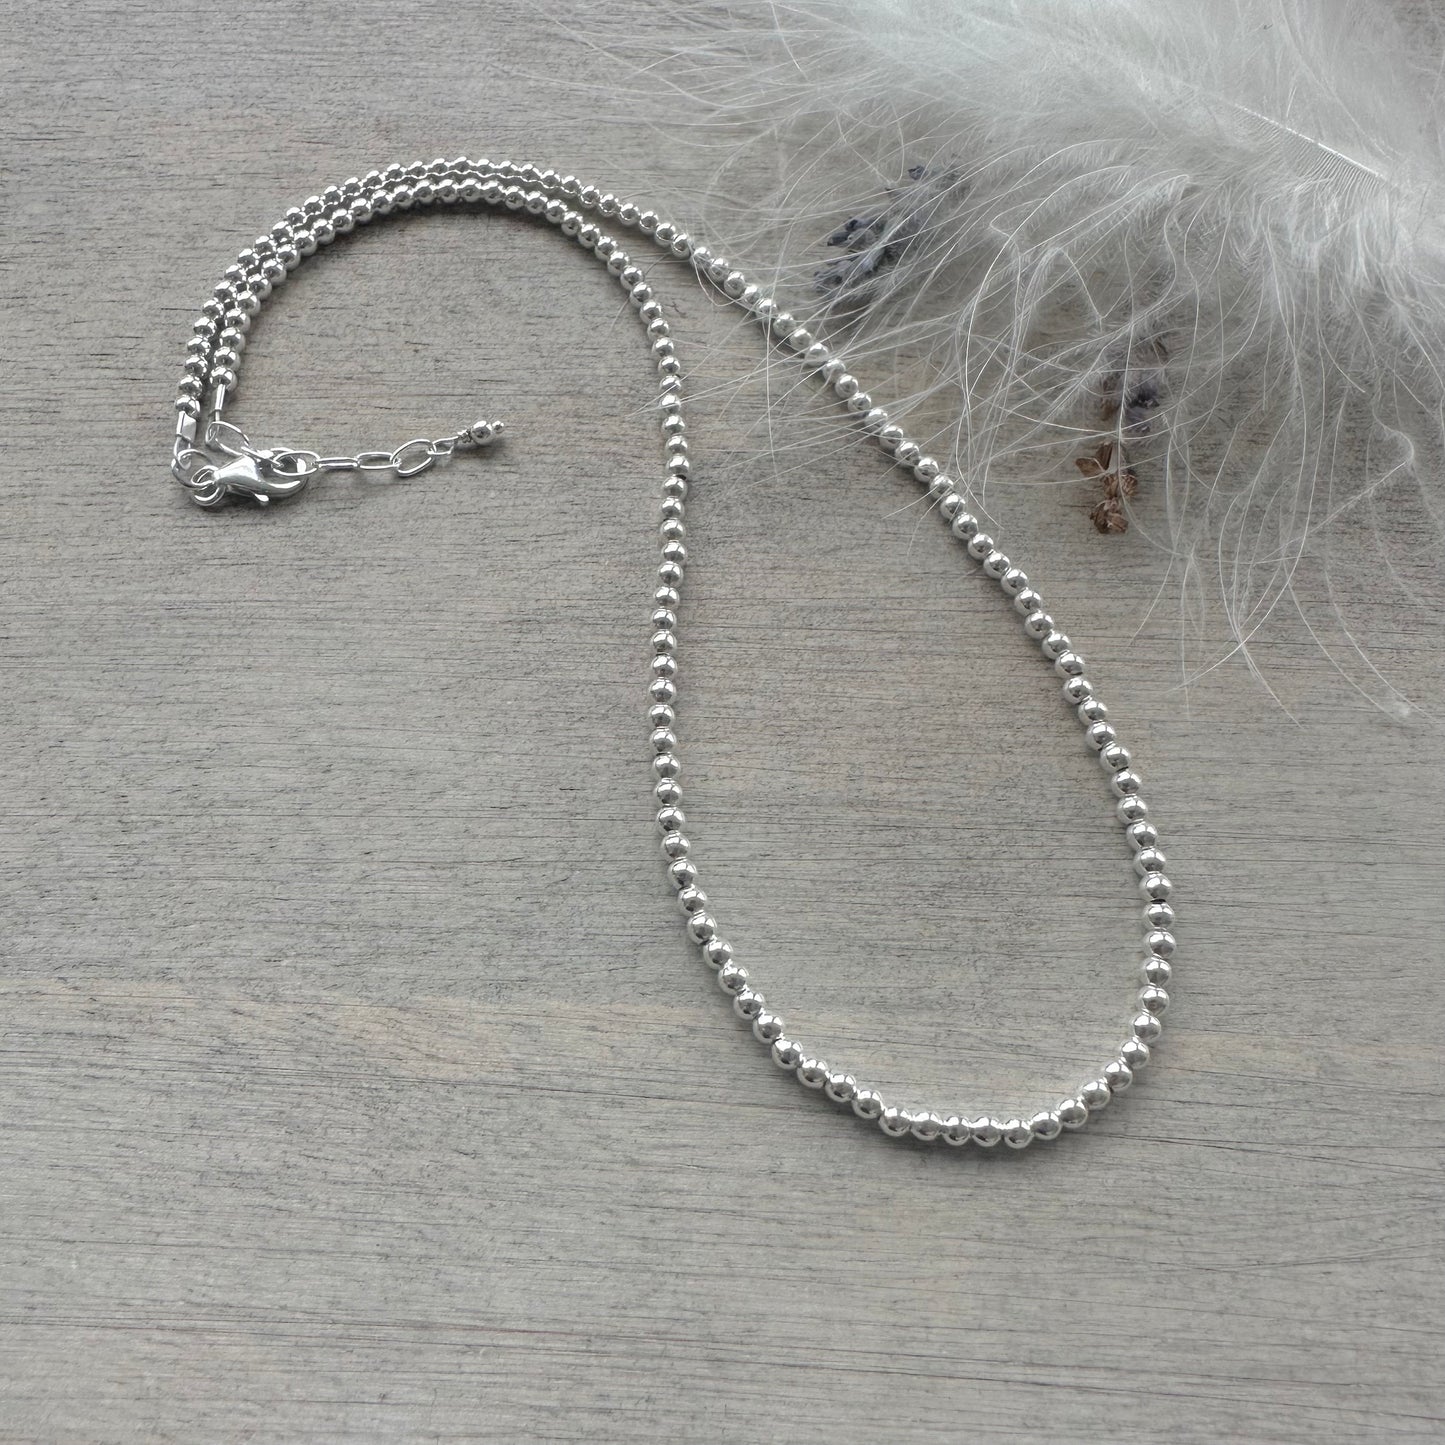 Thin Sterling Silver 3mm Bead Necklace, dainty necklace